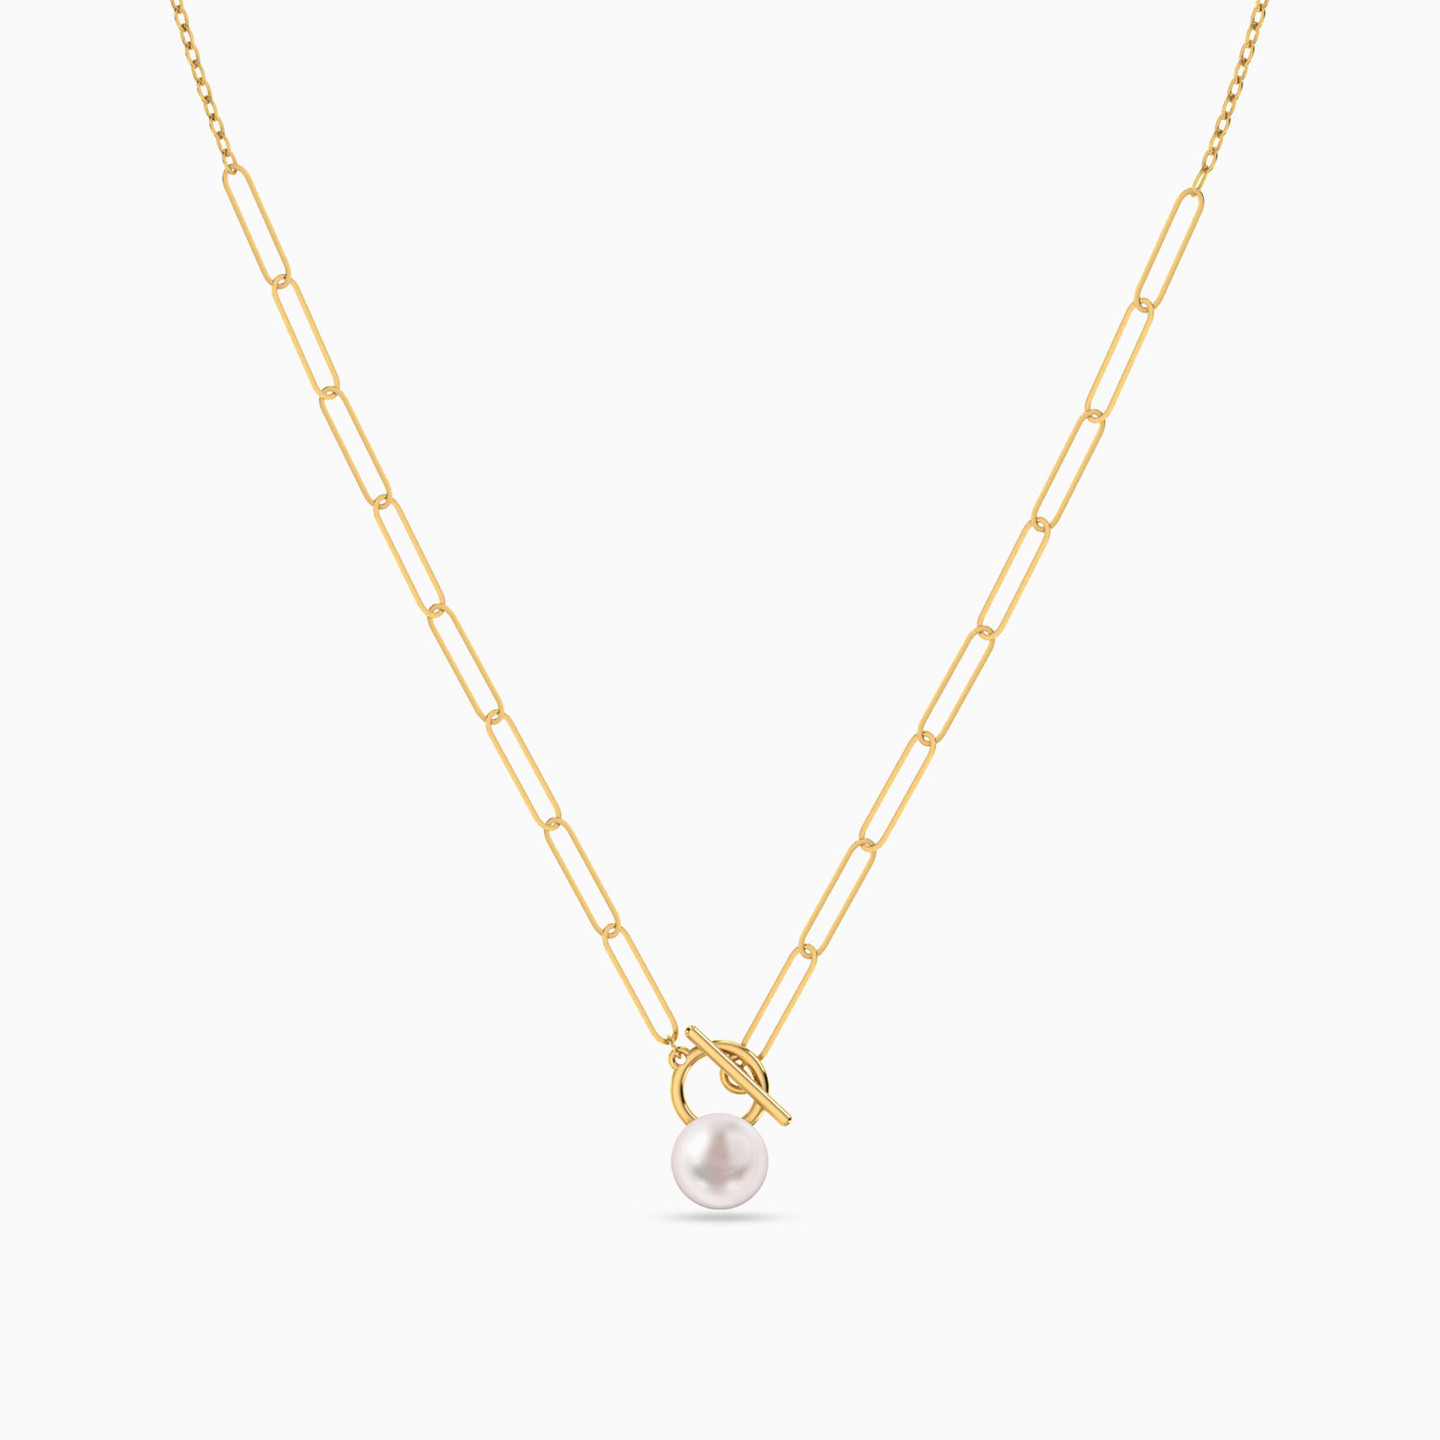 18K Gold Pearls Pendant Necklace - 6